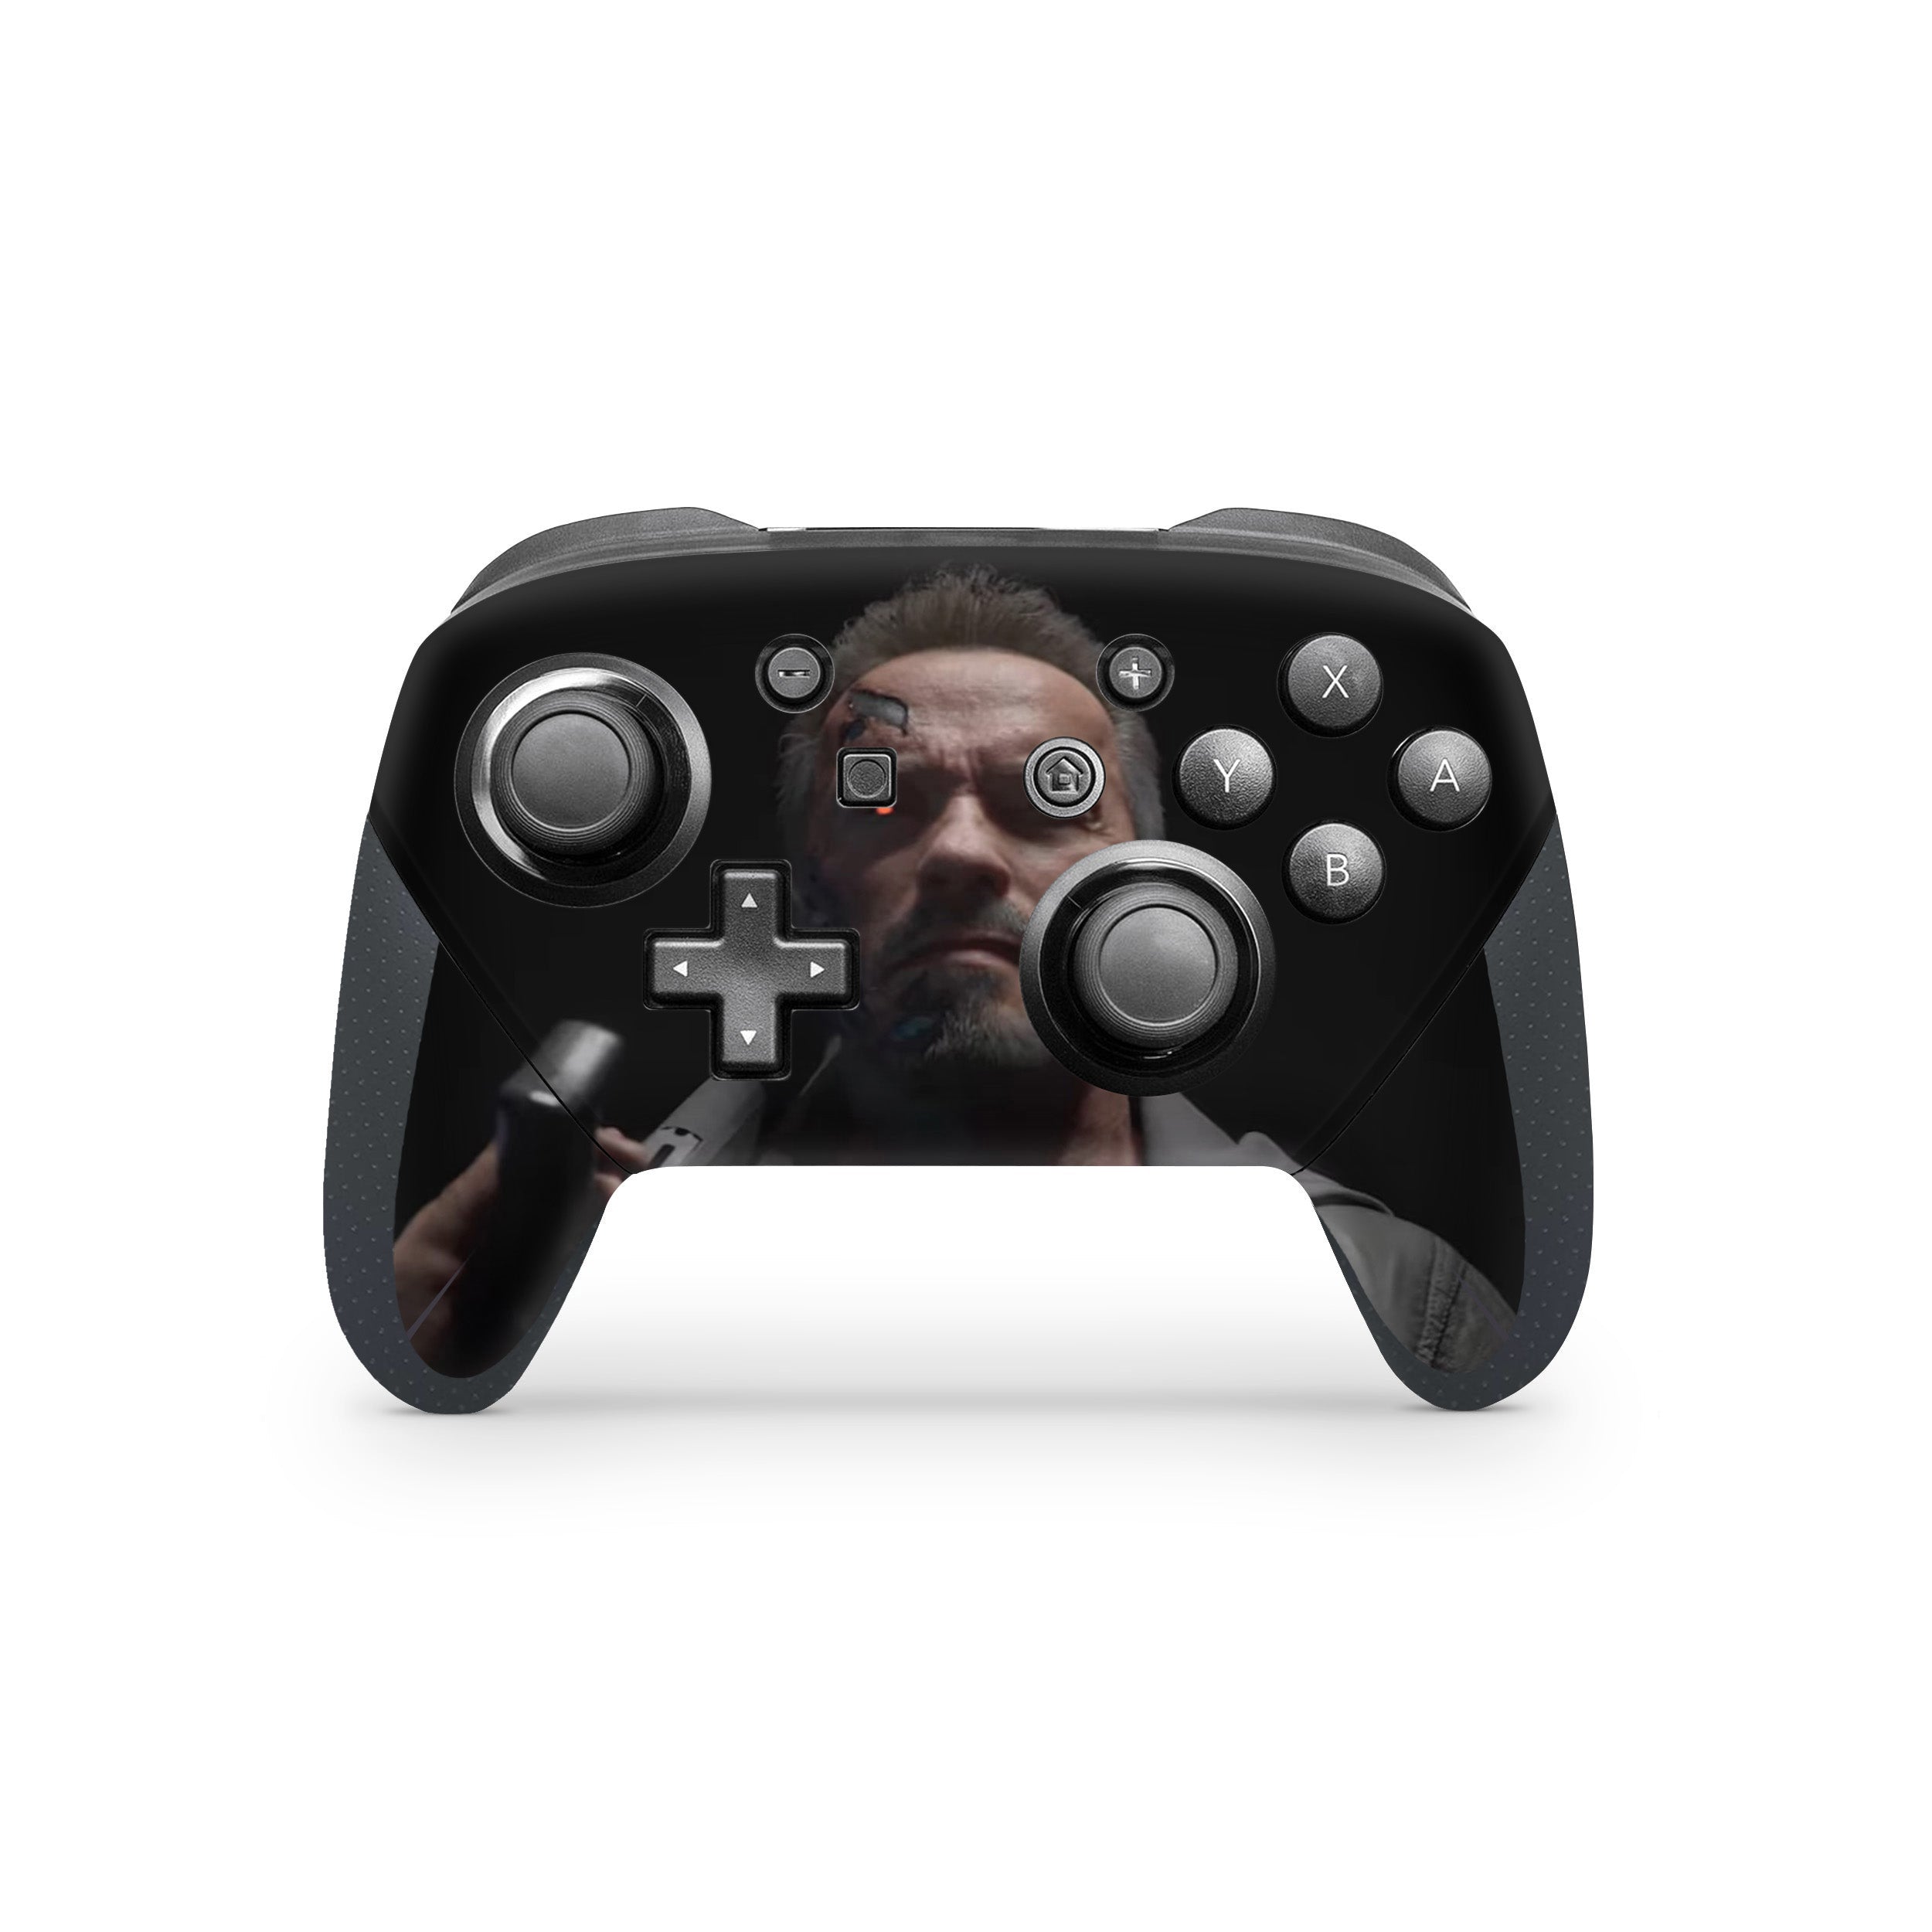 A video game skin featuring a Mortal Kombat 11 Shao Kahn design for the Switch Pro Controller.